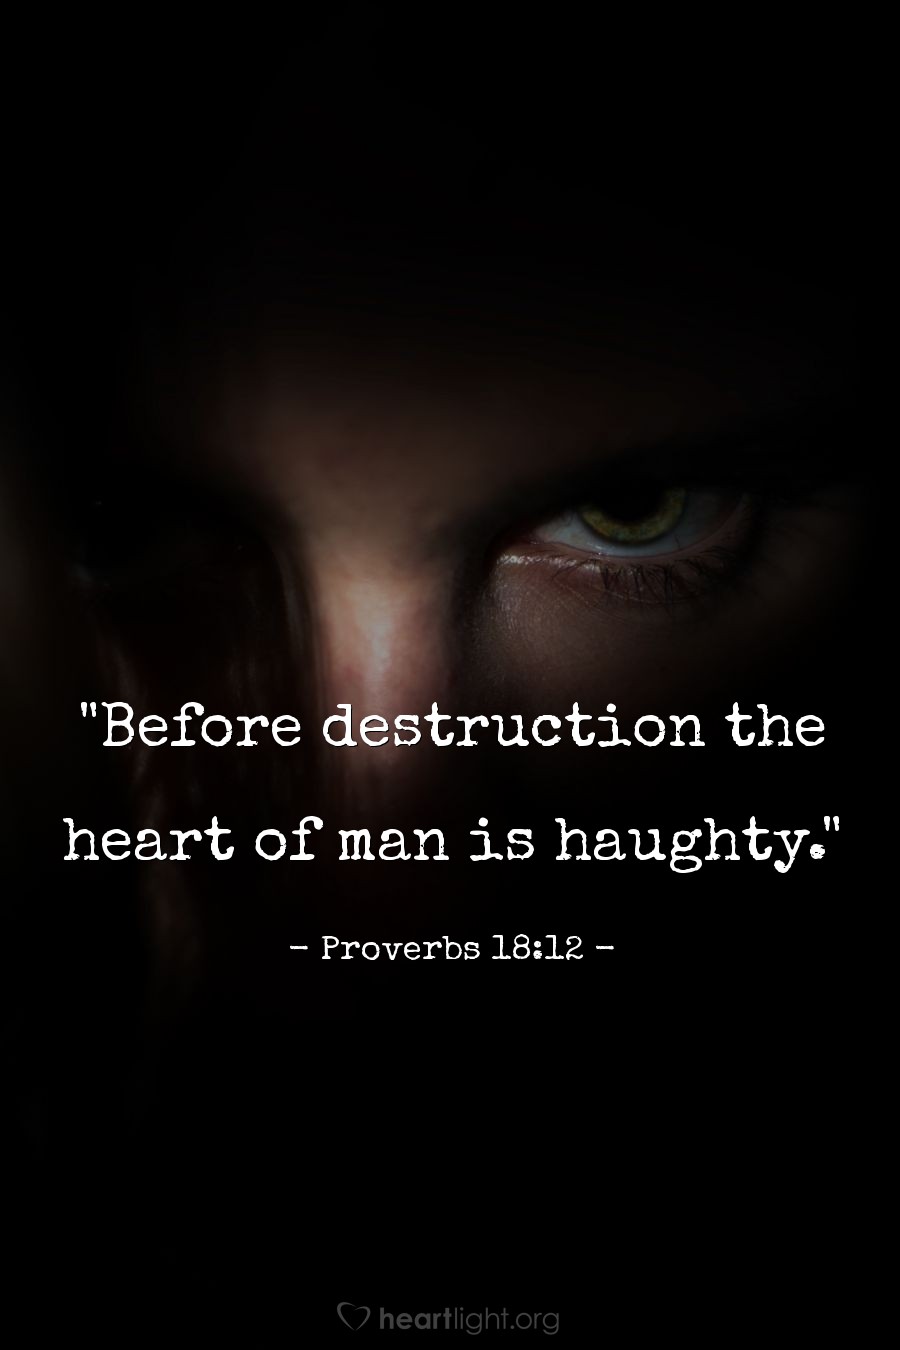 Illustration of Proverbs 18:12 — "Before destruction the heart of man is haughty."